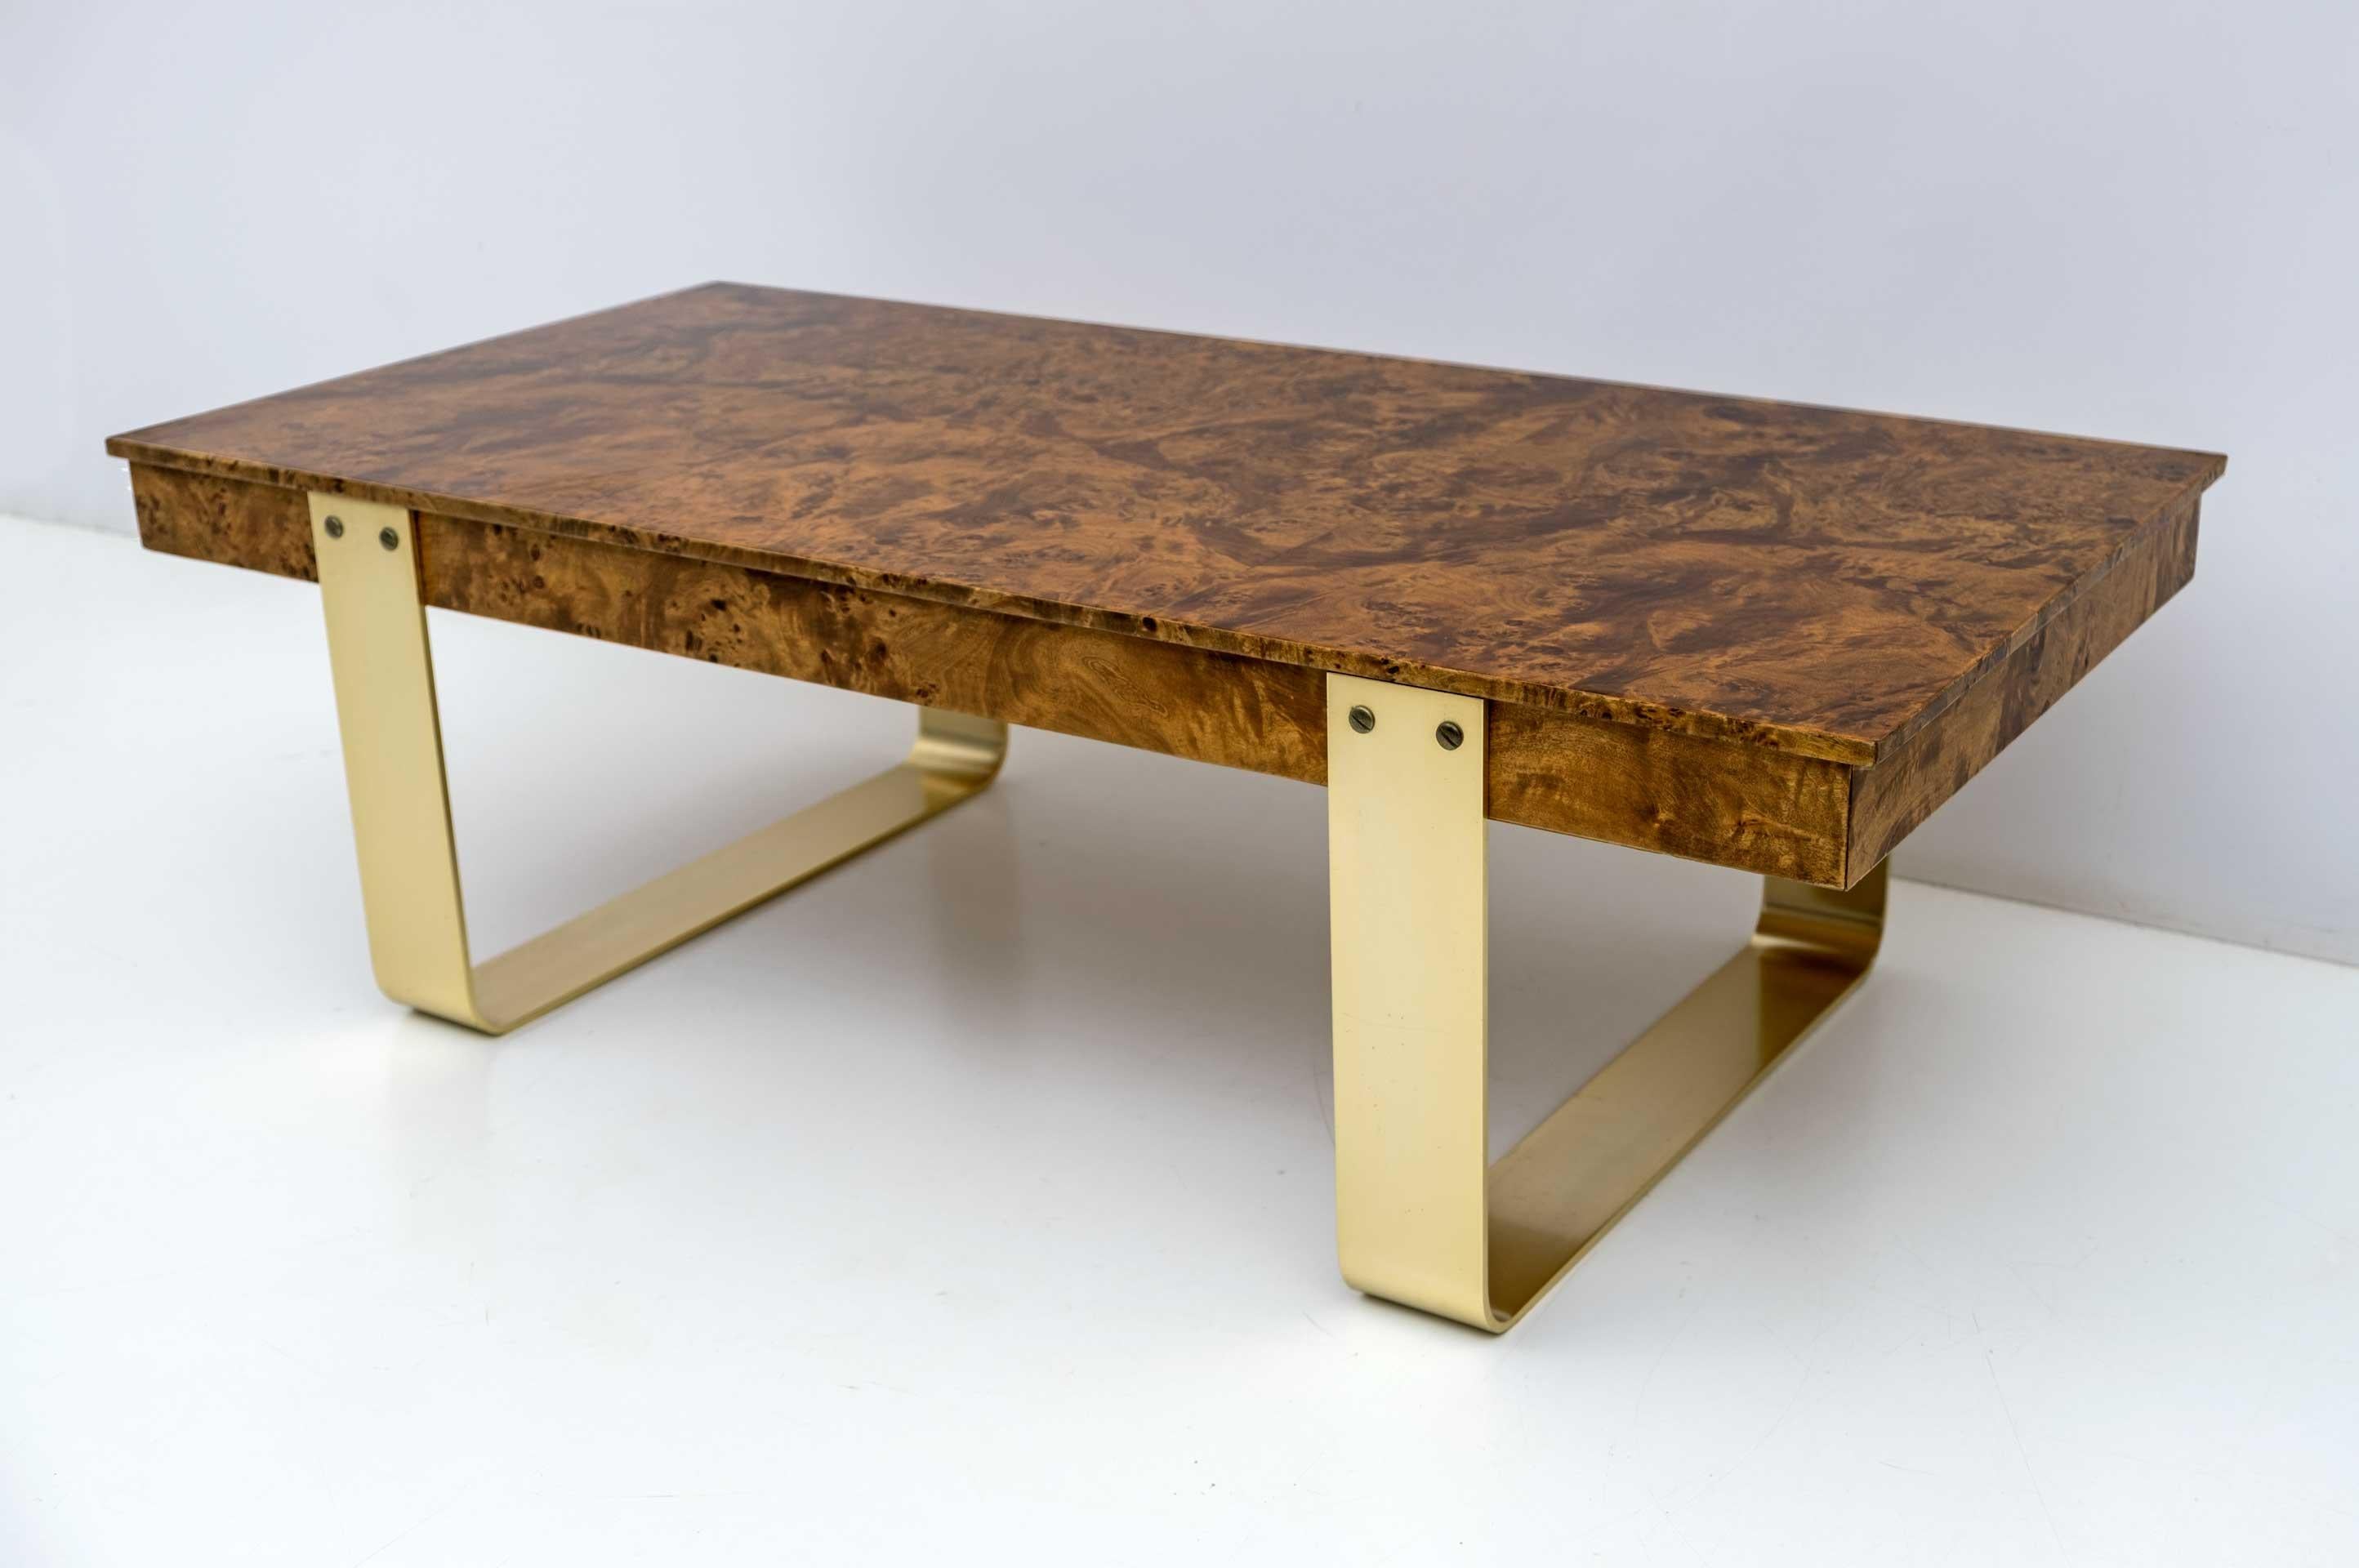 Italian coffee table in walnut briar and brass, 70s.
The coffee table has been restored and polished with shellac.